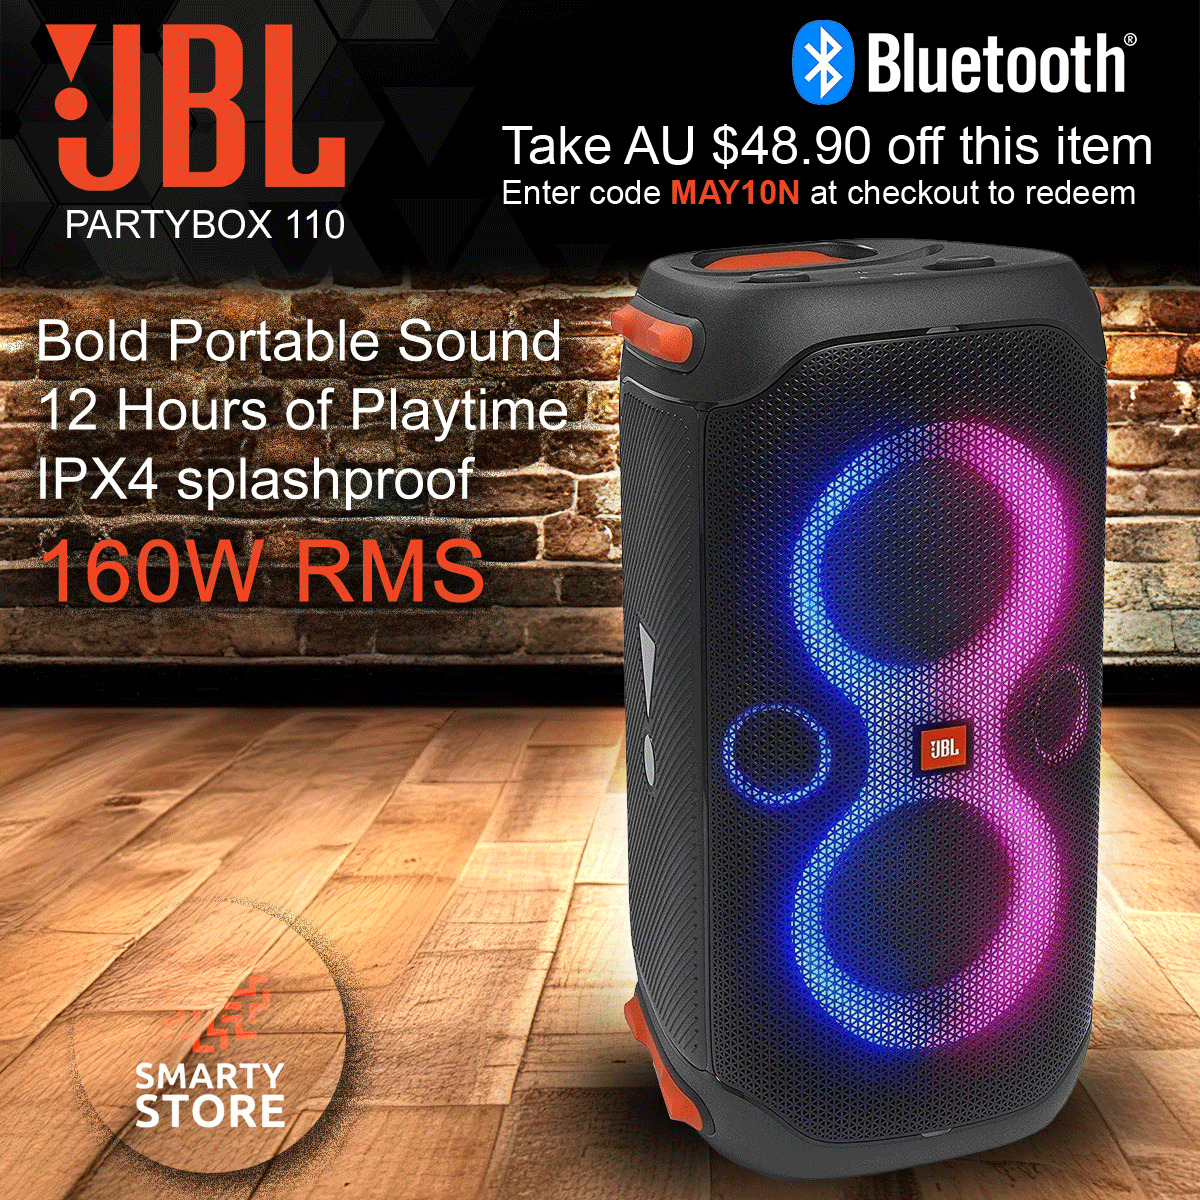 JBL Partybox 110 Portable Speaker Stereo Sound System TWS 160W RMS